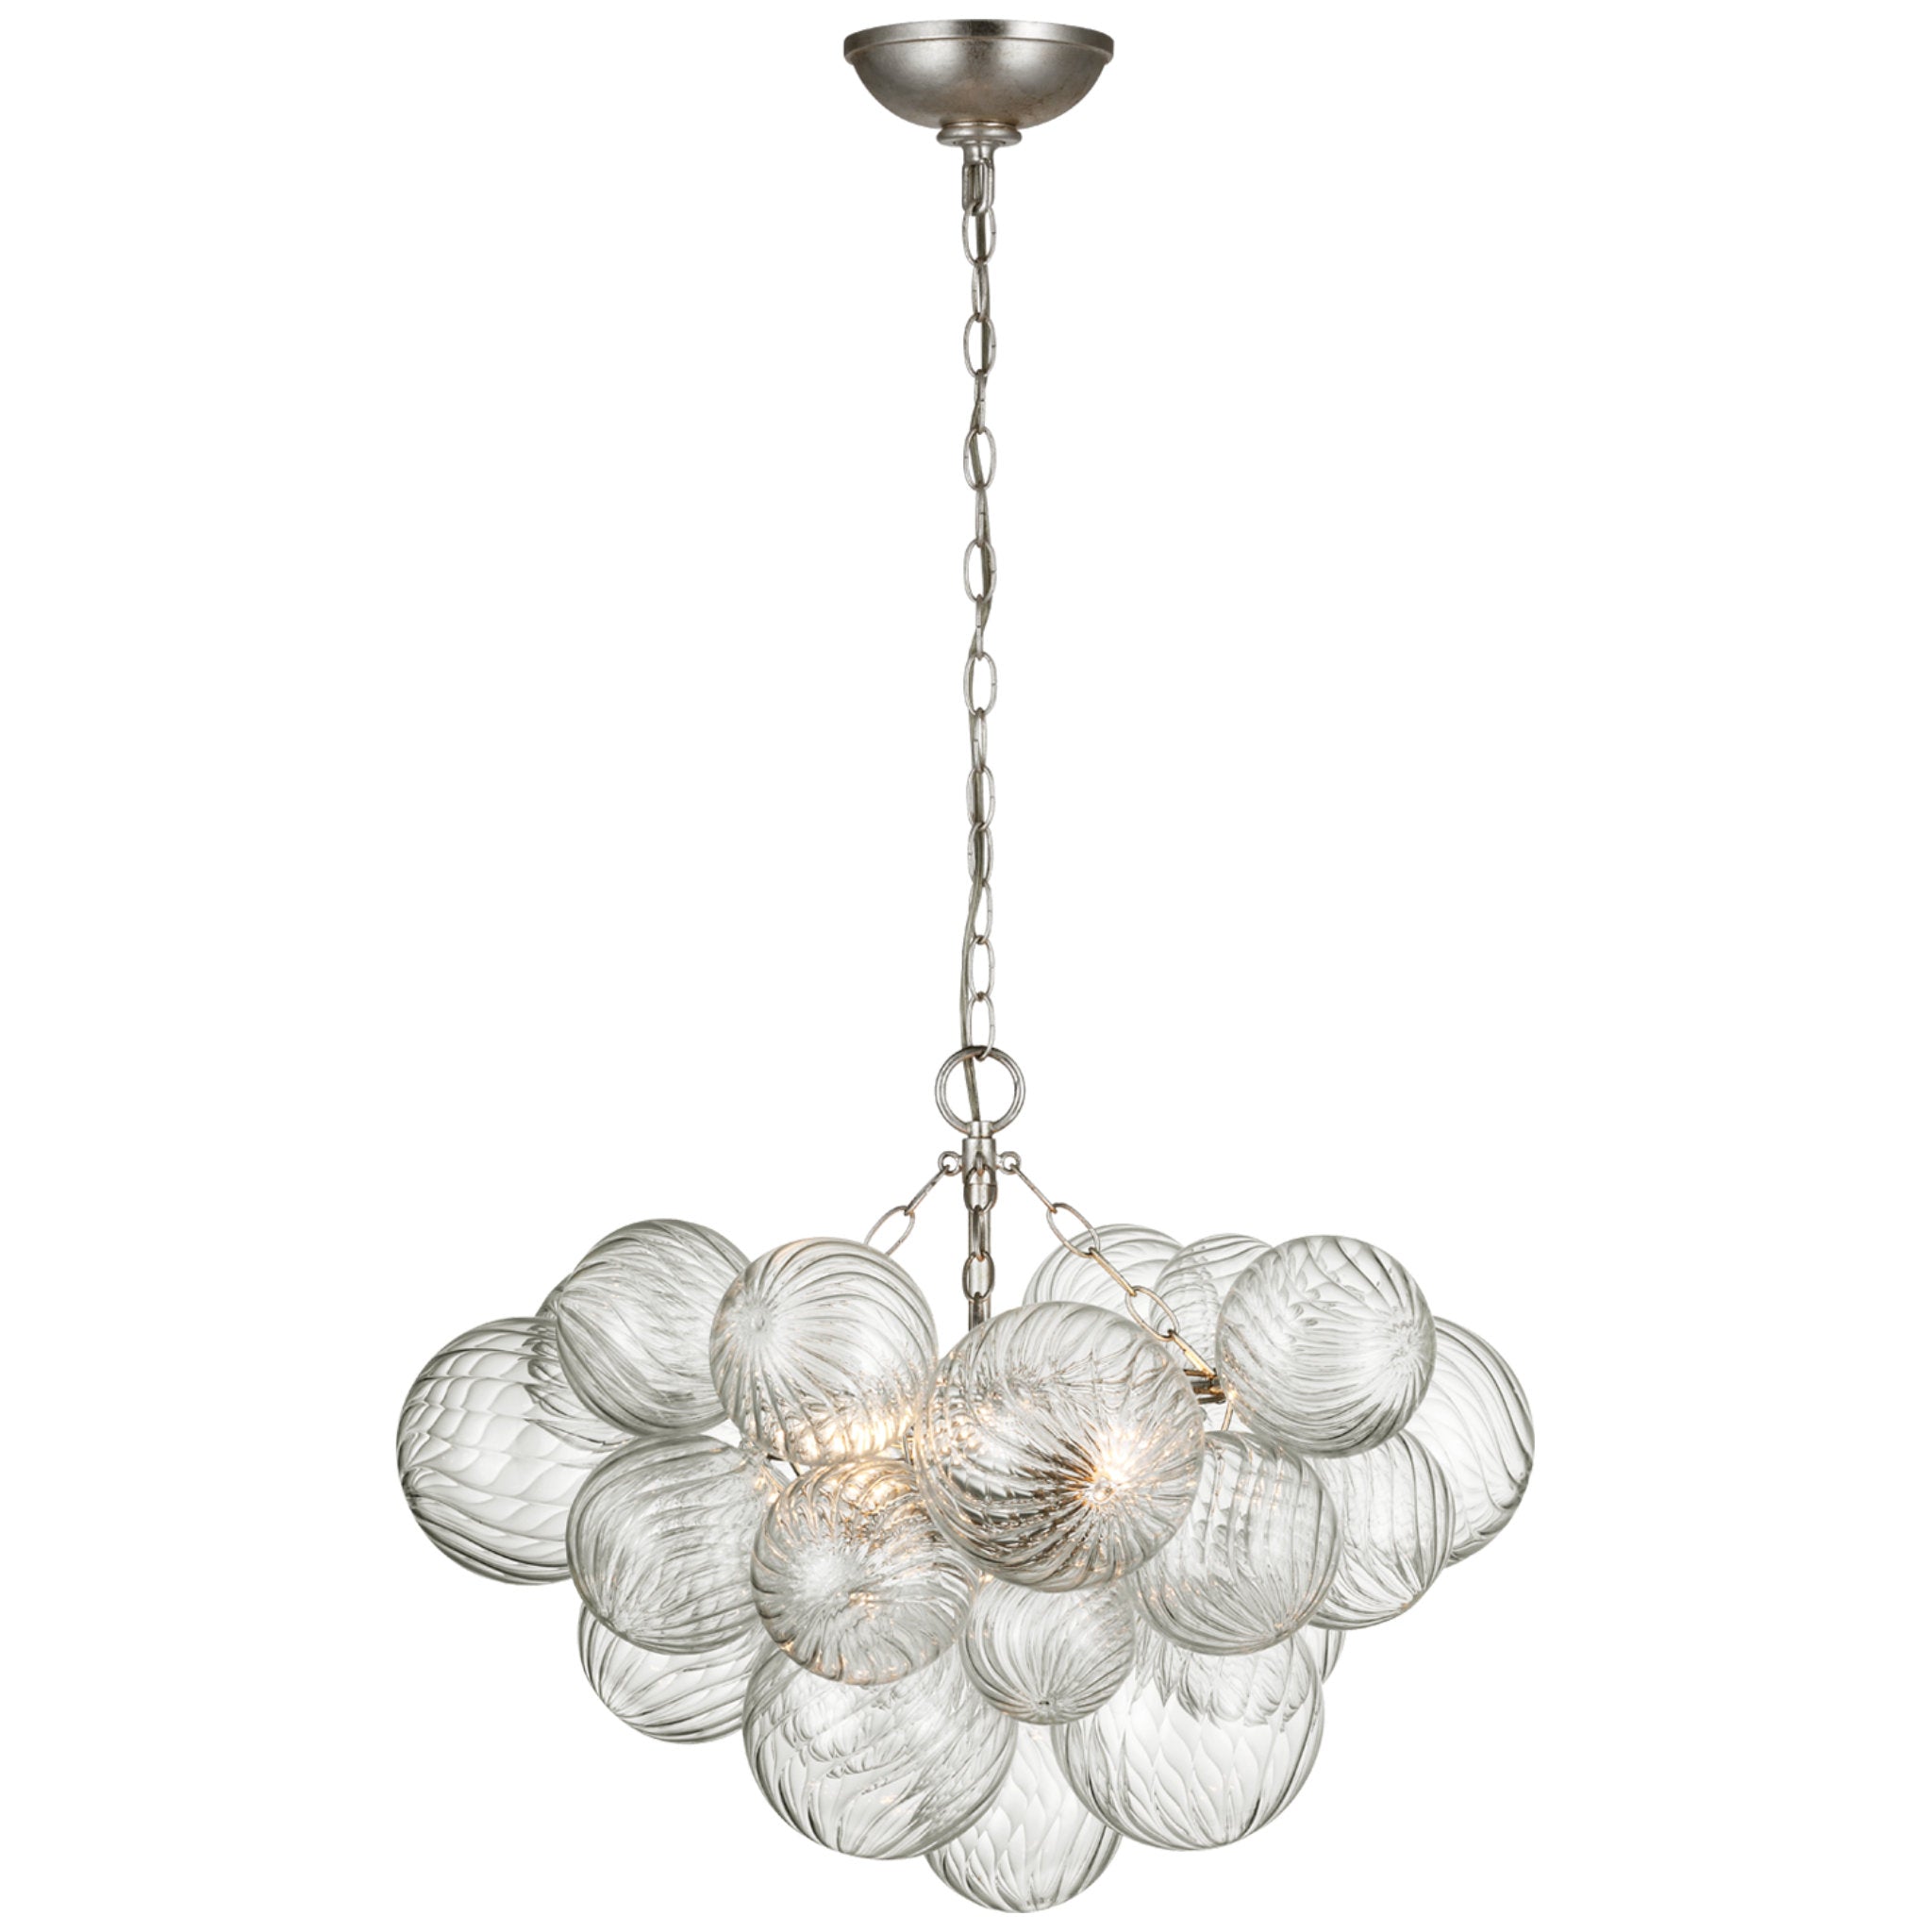 Julie Neill Talia Small Chandelier in Burnished Silver Leaf and Clear Swirled Glass